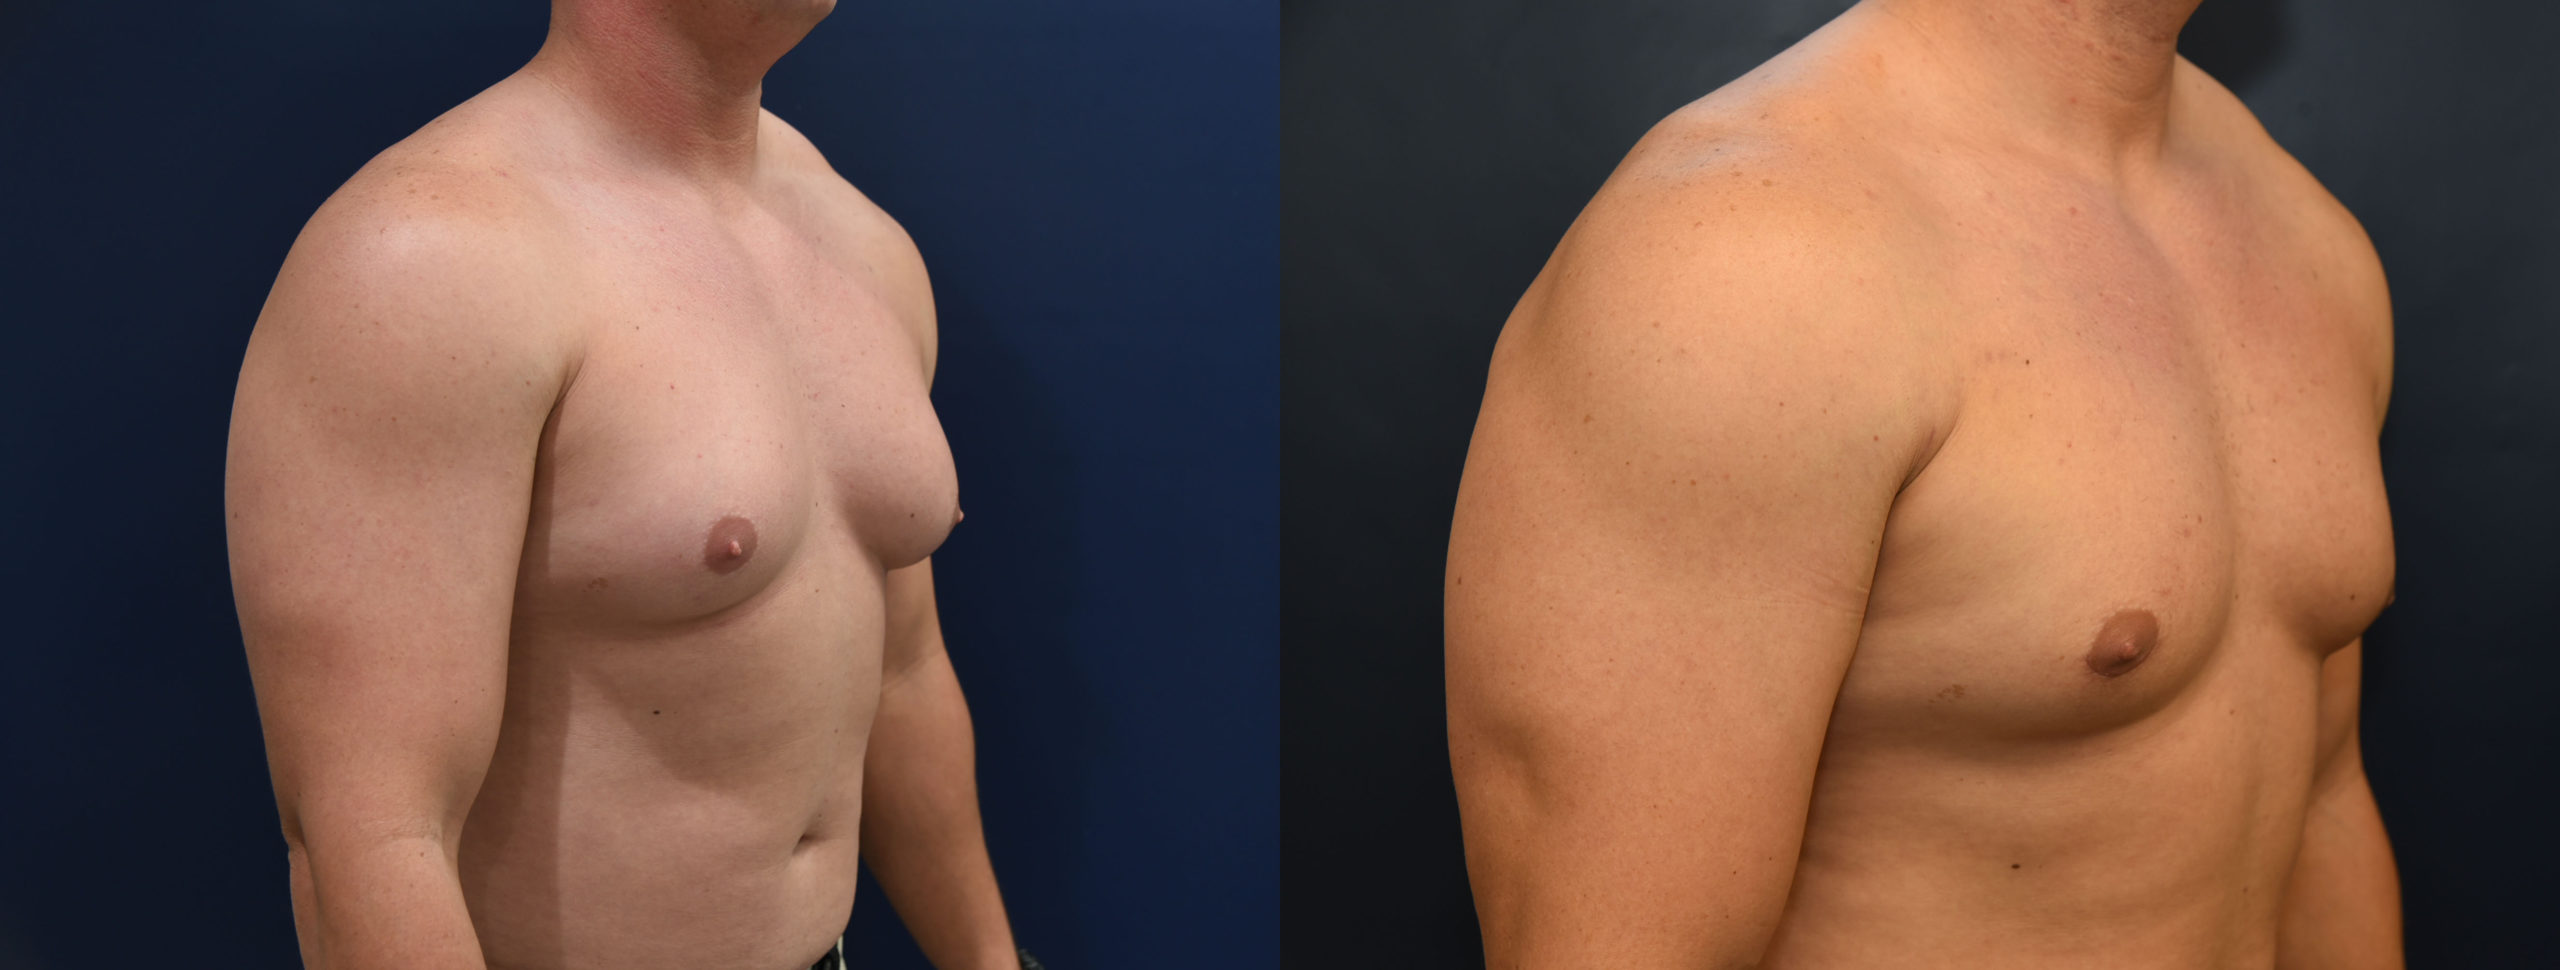 Gynecomastia Before and After Photo by Dr. Butler in Pensacola Florida